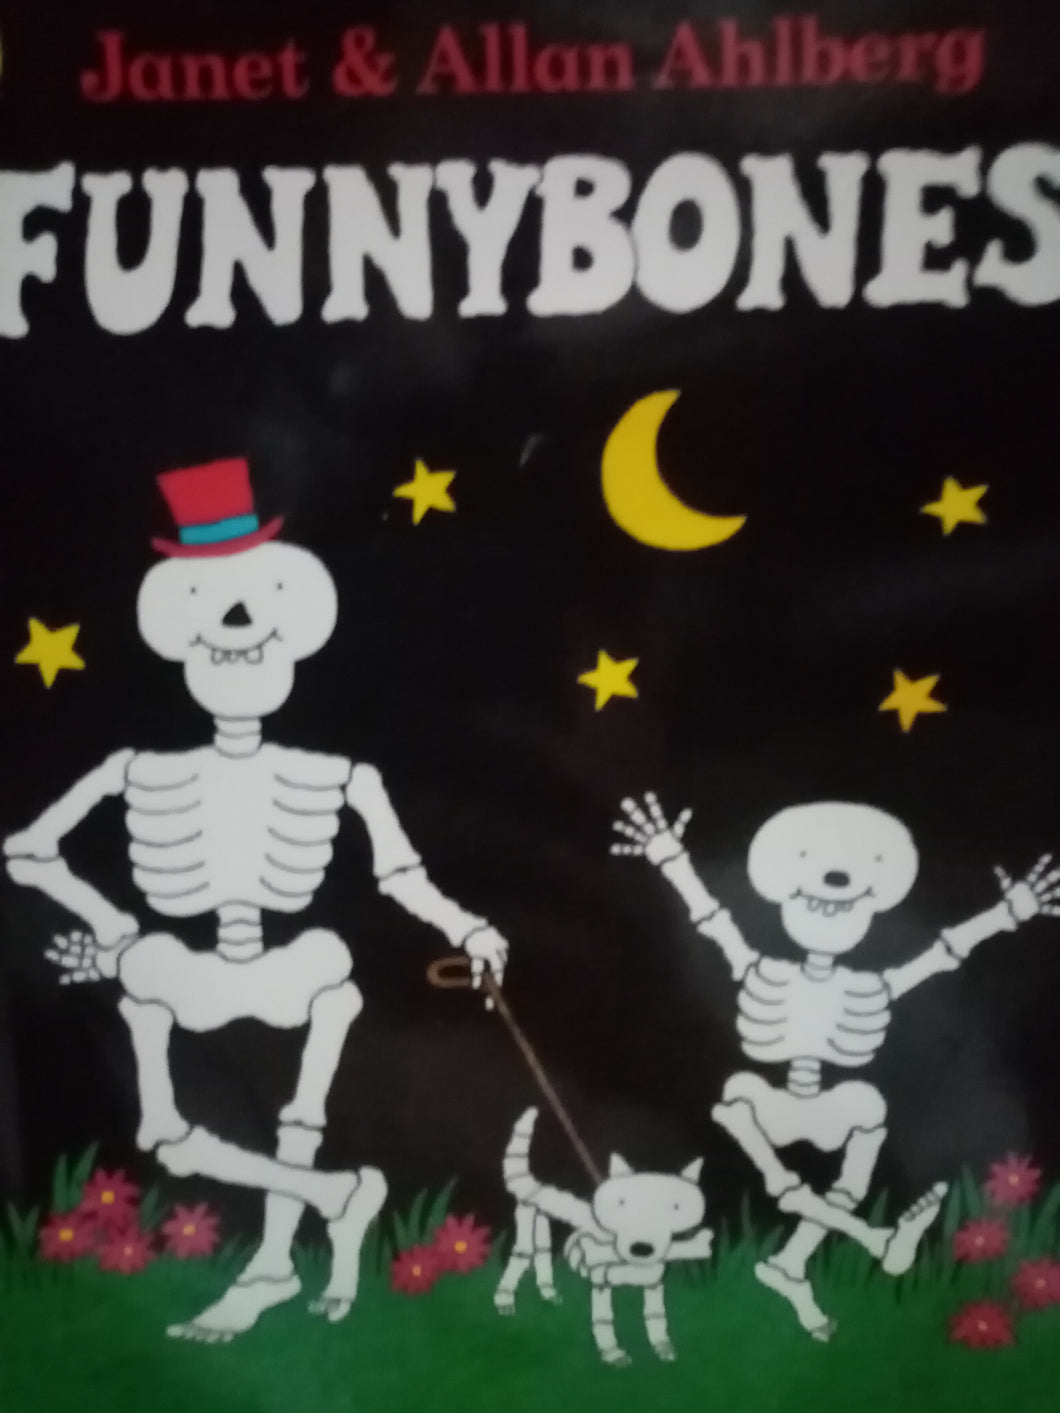 Funnybones By Janet and Allan Ahlberg